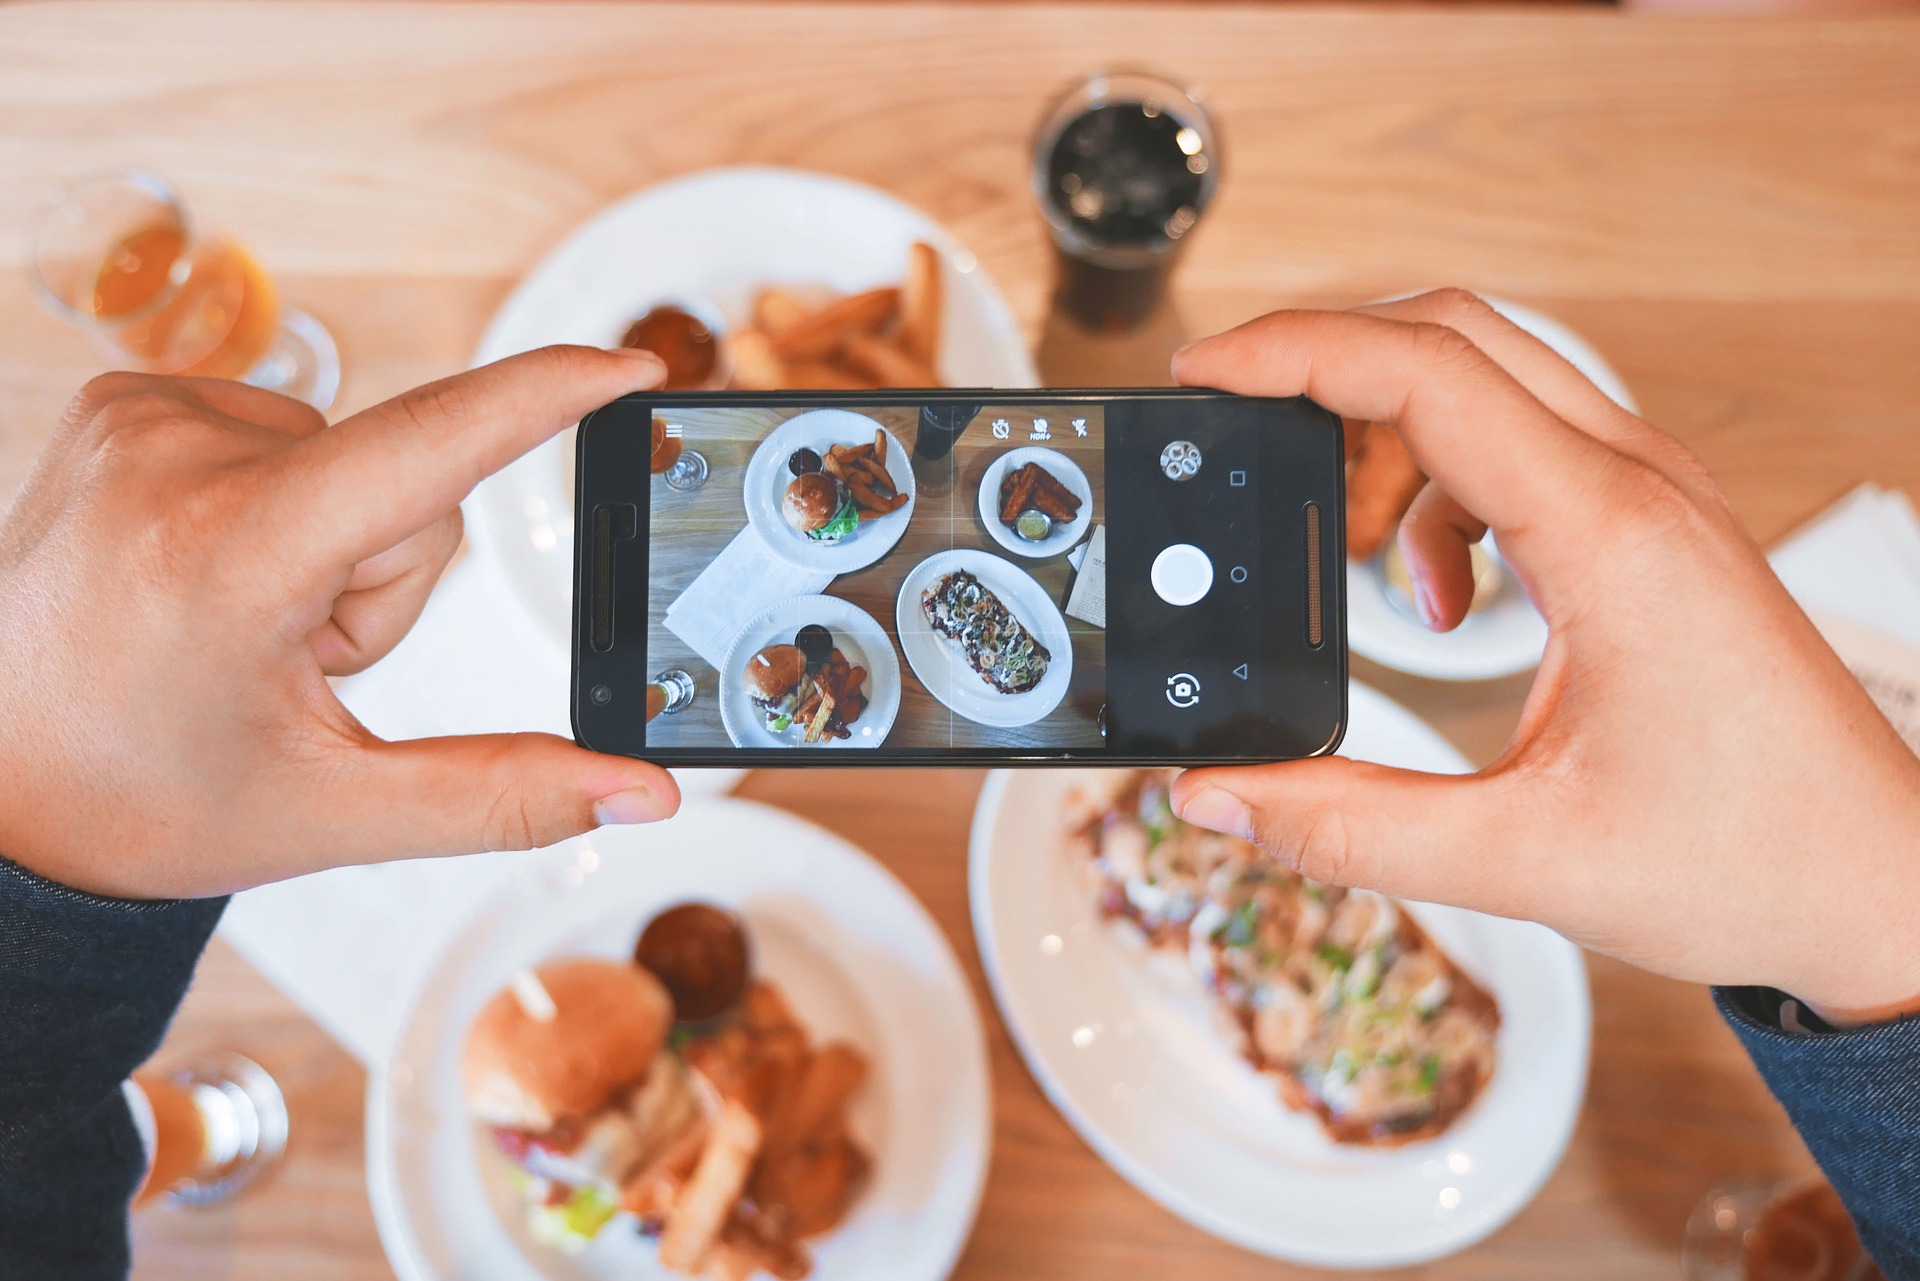 Exposure to Instagram influencers can make kids overeat